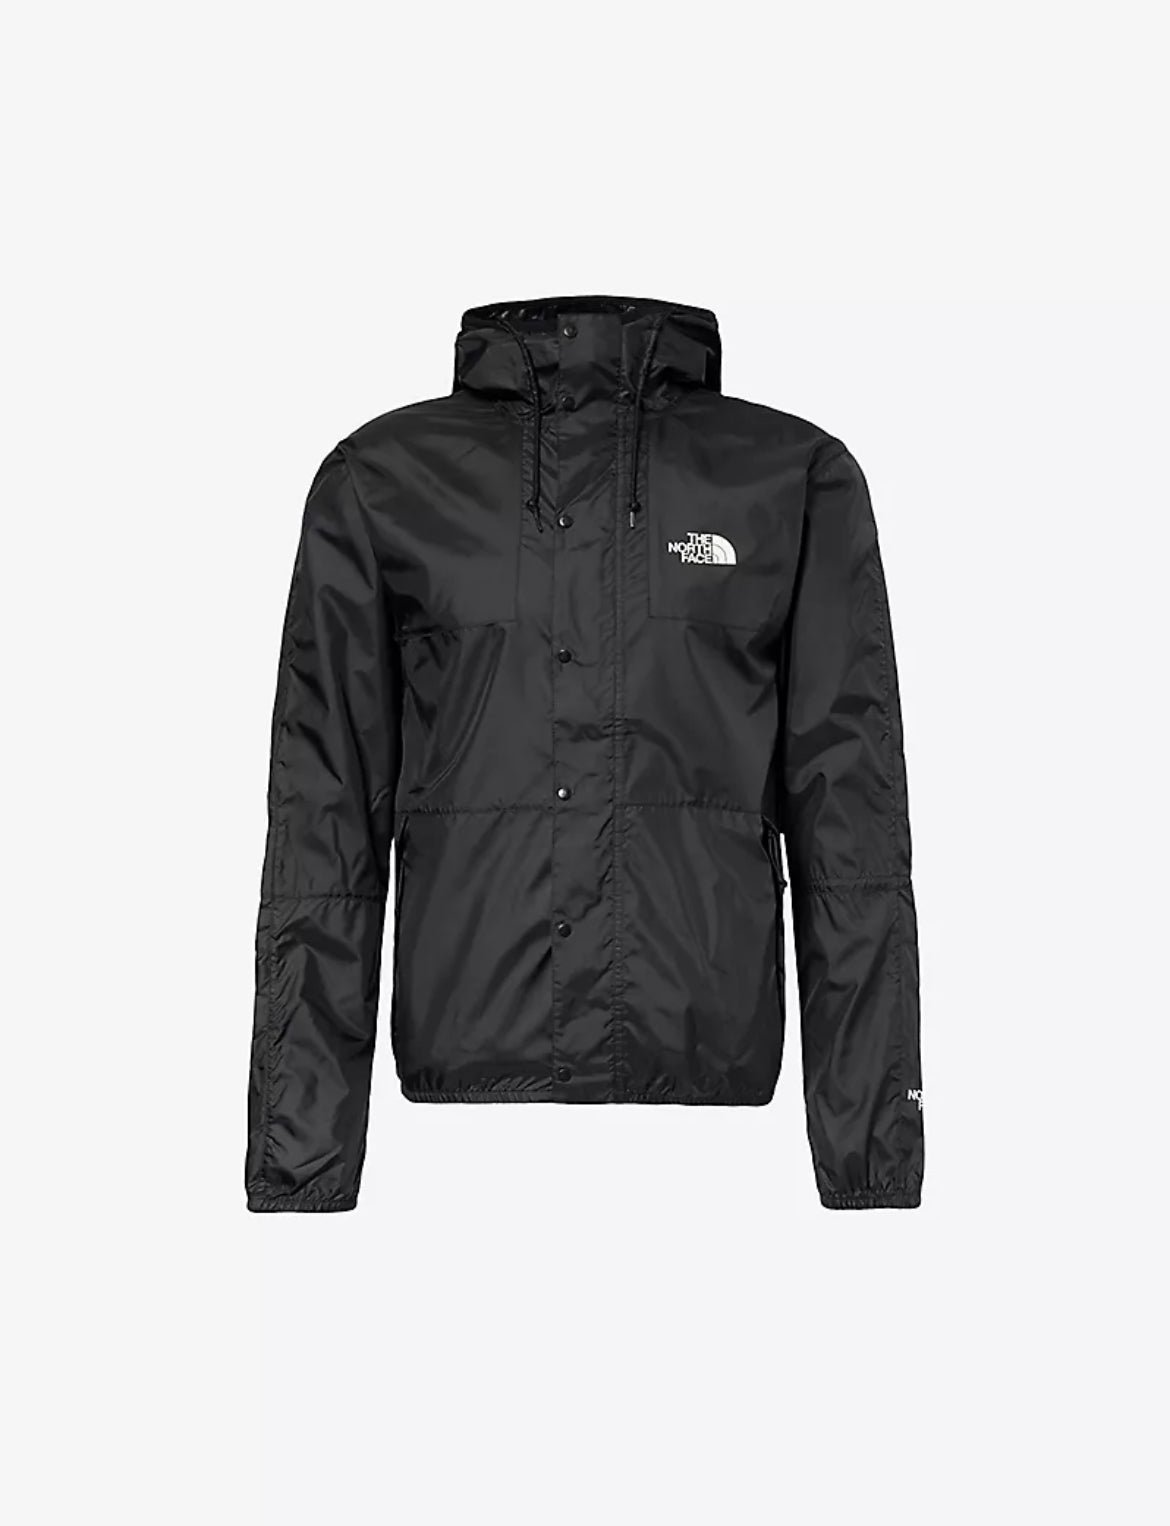 THE NORTH FACE SEASONAL MOUNTAIN JACKET - BLACK – SGN CLOTHING